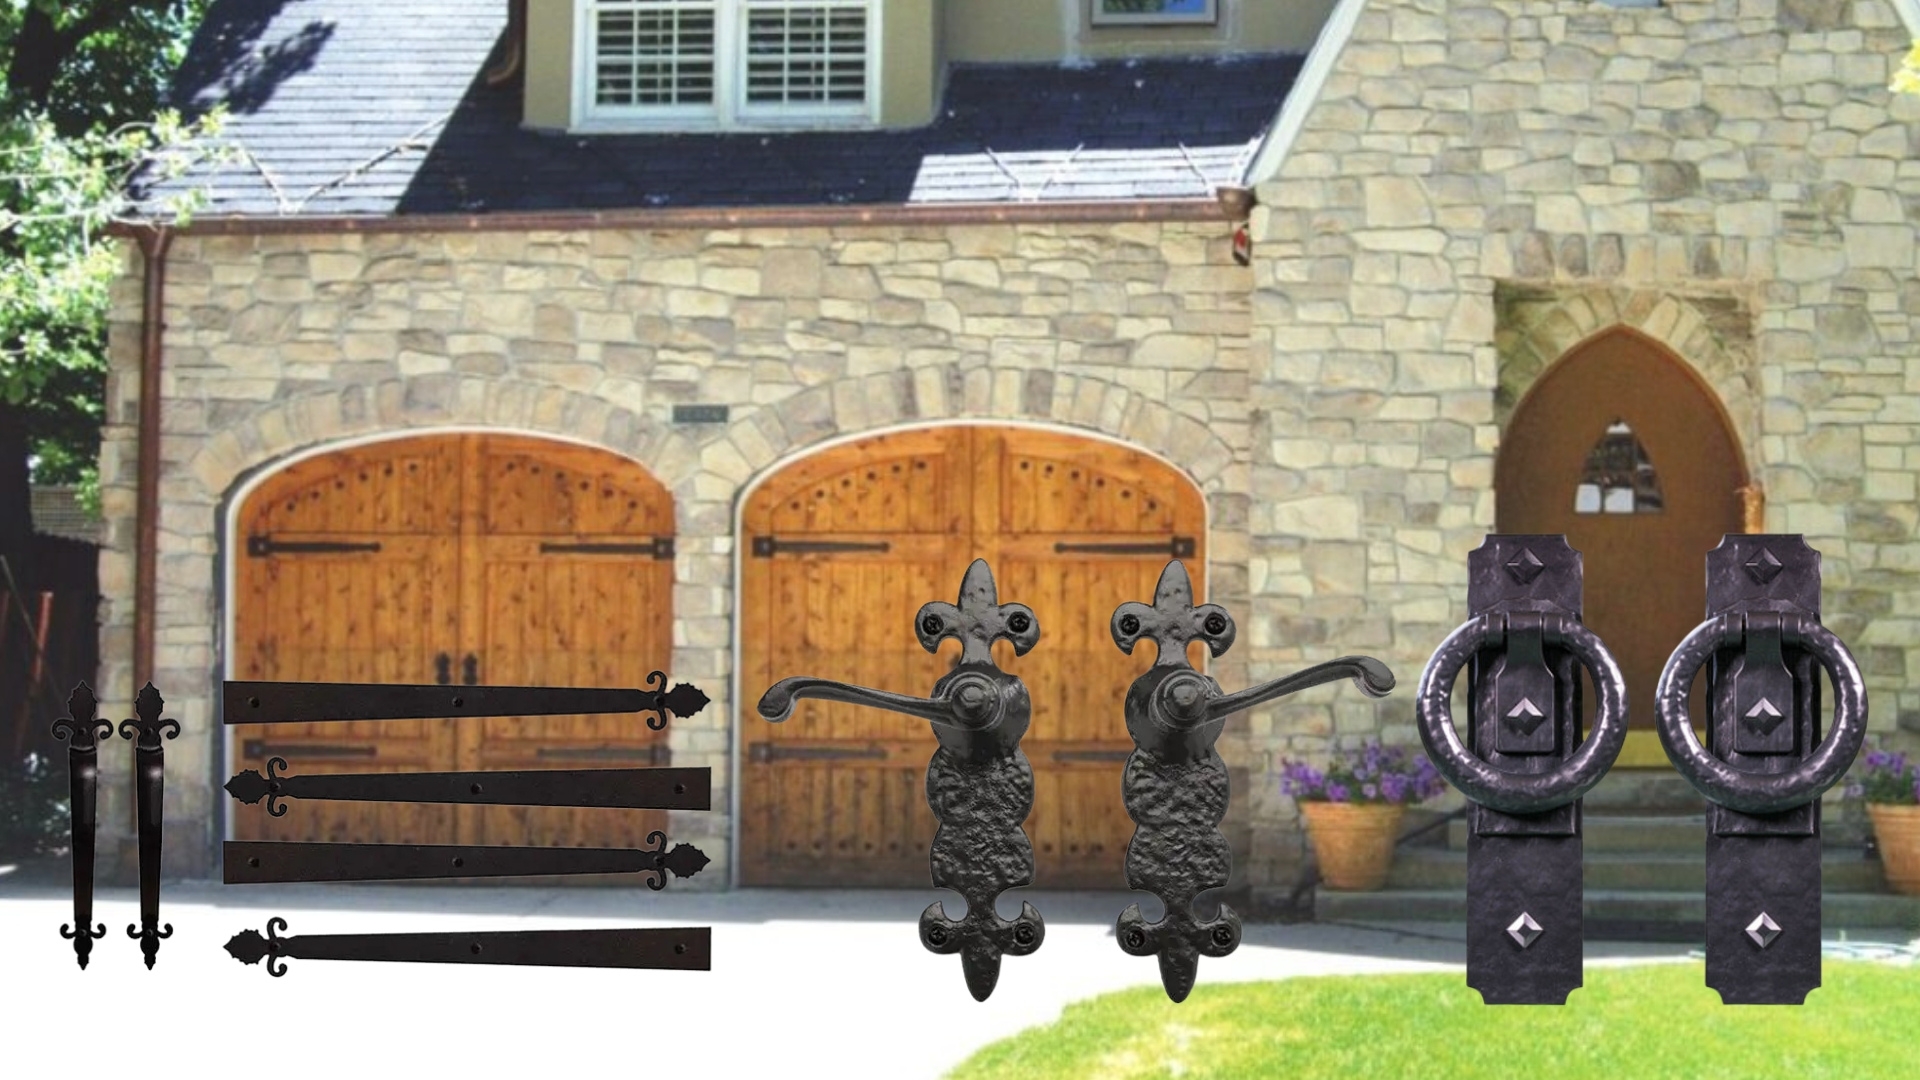 Titan-Garage-Doors-Quad-Cities-Stylish-Decorative-Hardware-Options-for-Your-Garage-Door-Material-and-Finish-Options